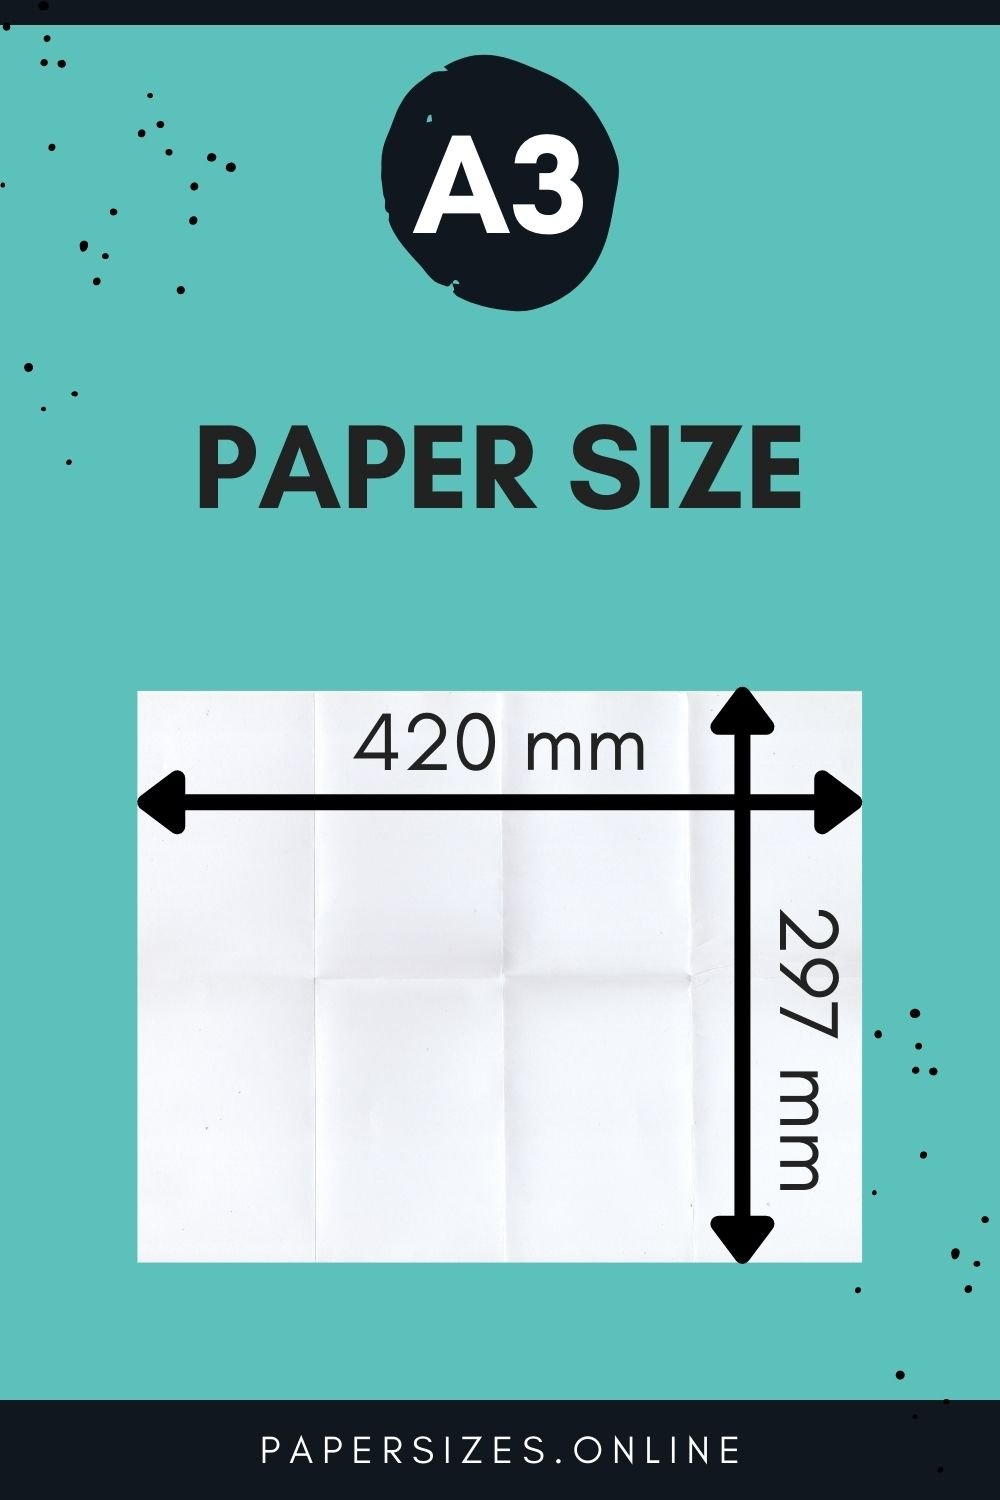 A3 Paper Size in mm